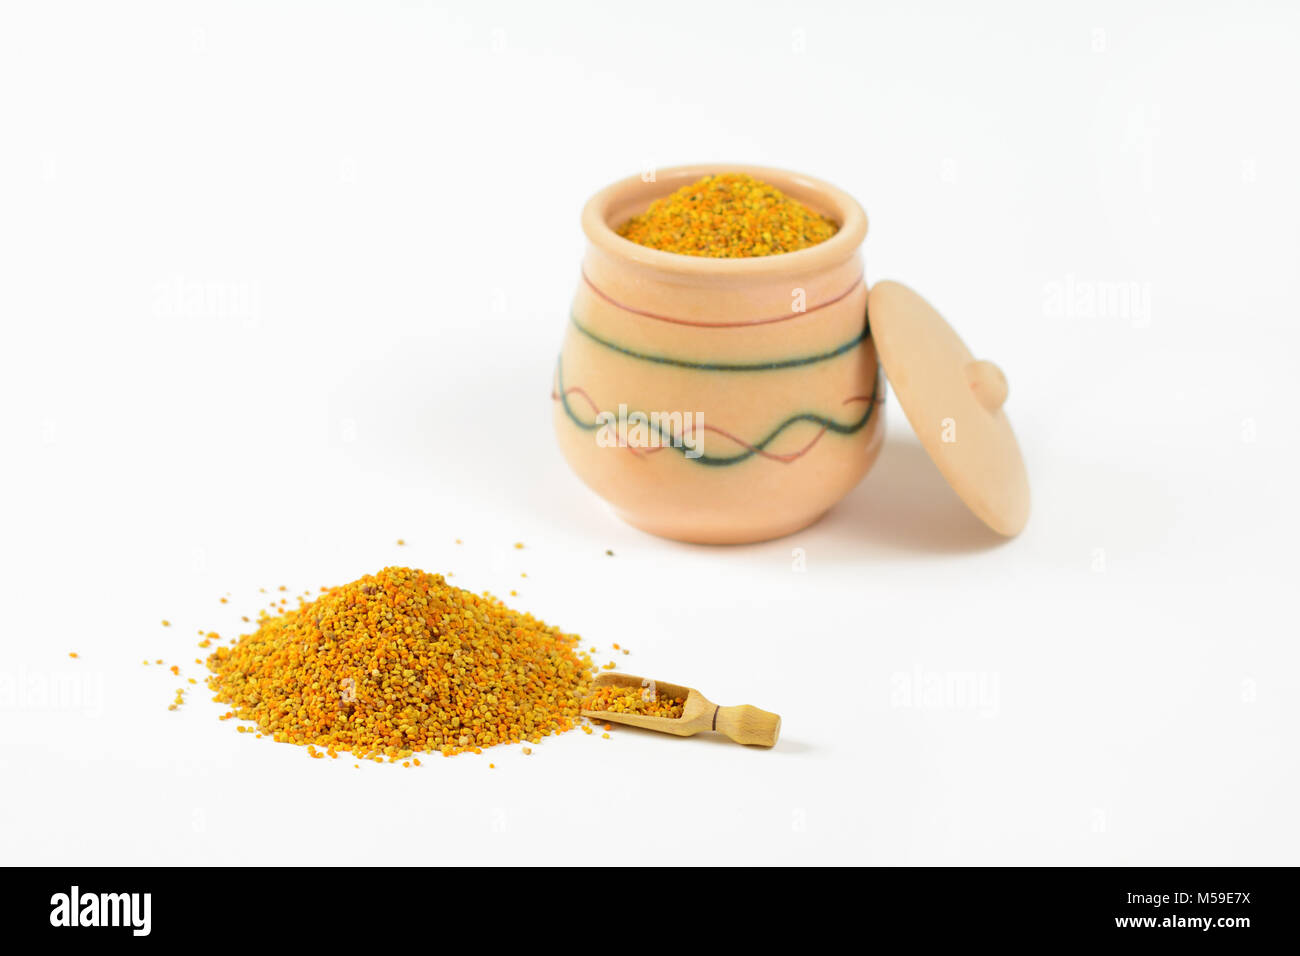 Pile of bee pollen and a little wooden scoop. In a blurry background, it is visible glazed clay pot full of pollen with a lid leaning against the pot. Stock Photo